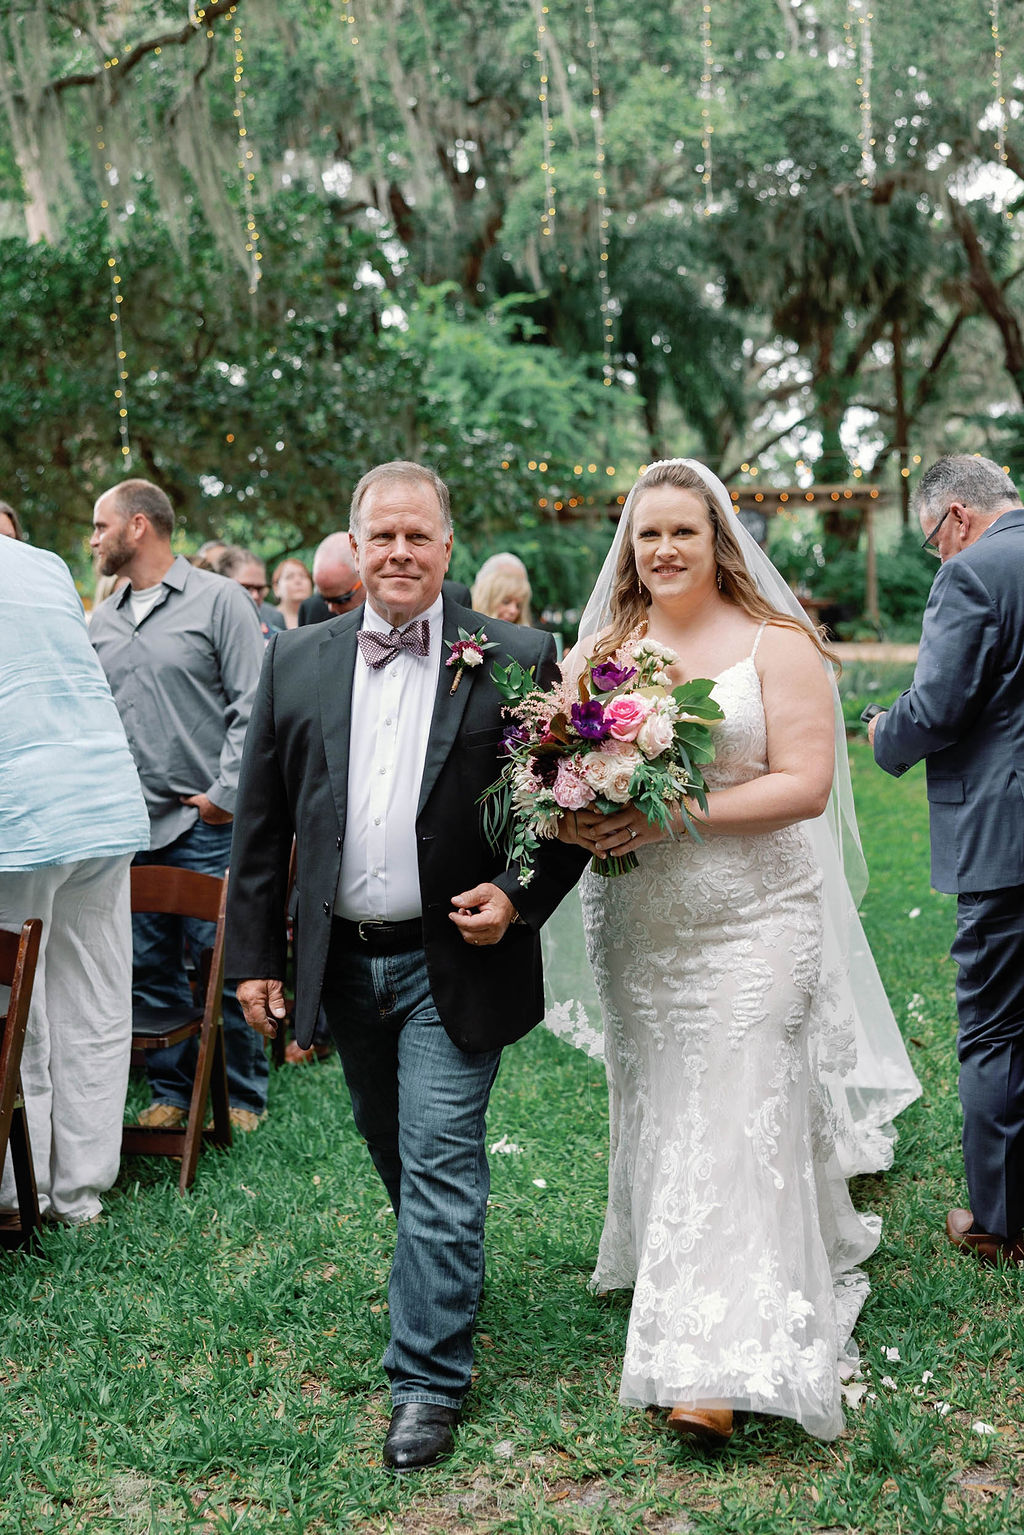 Ashley and her father walking down the aisle